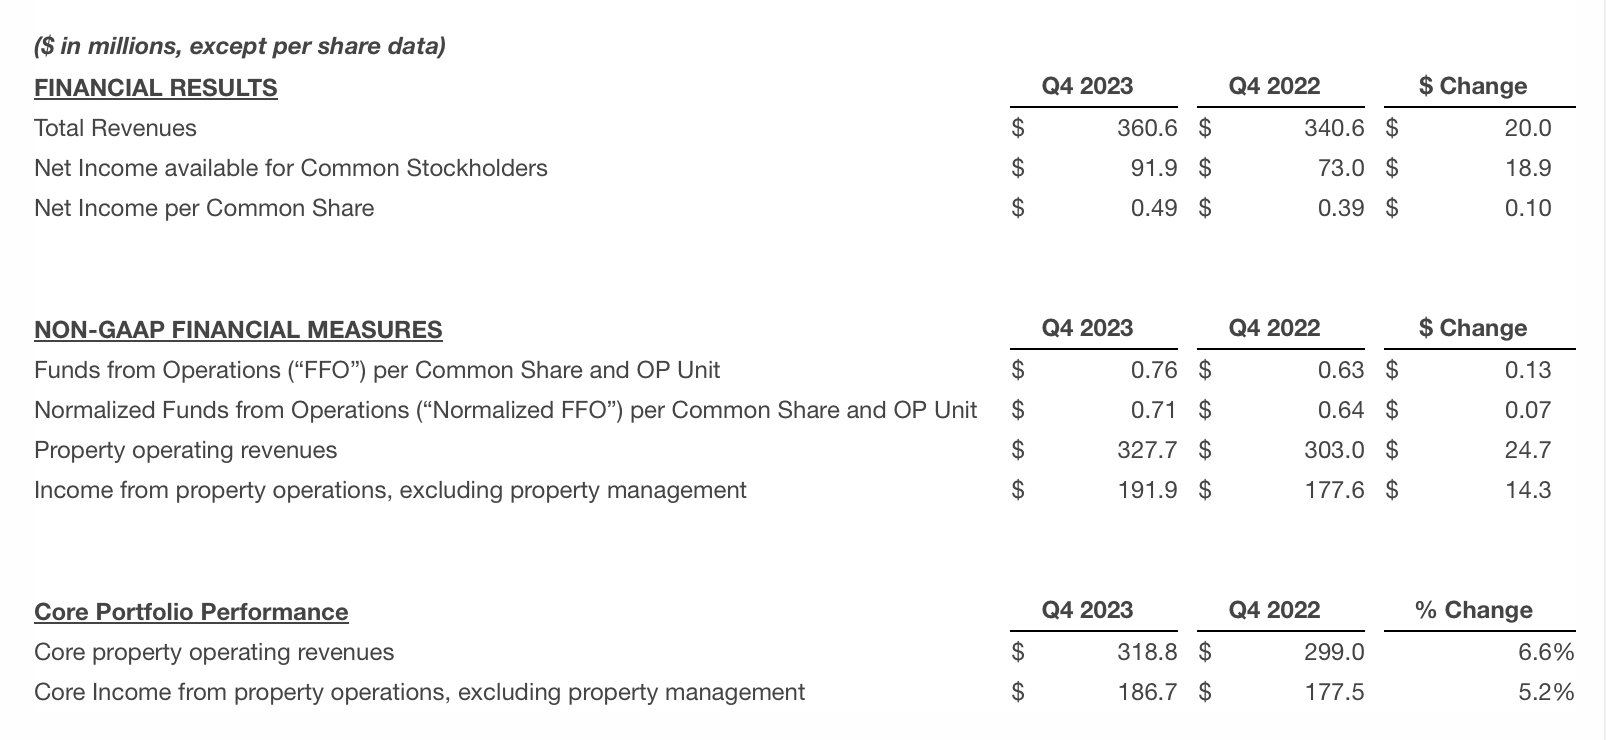 Equity LifeStyle Properties q4 results